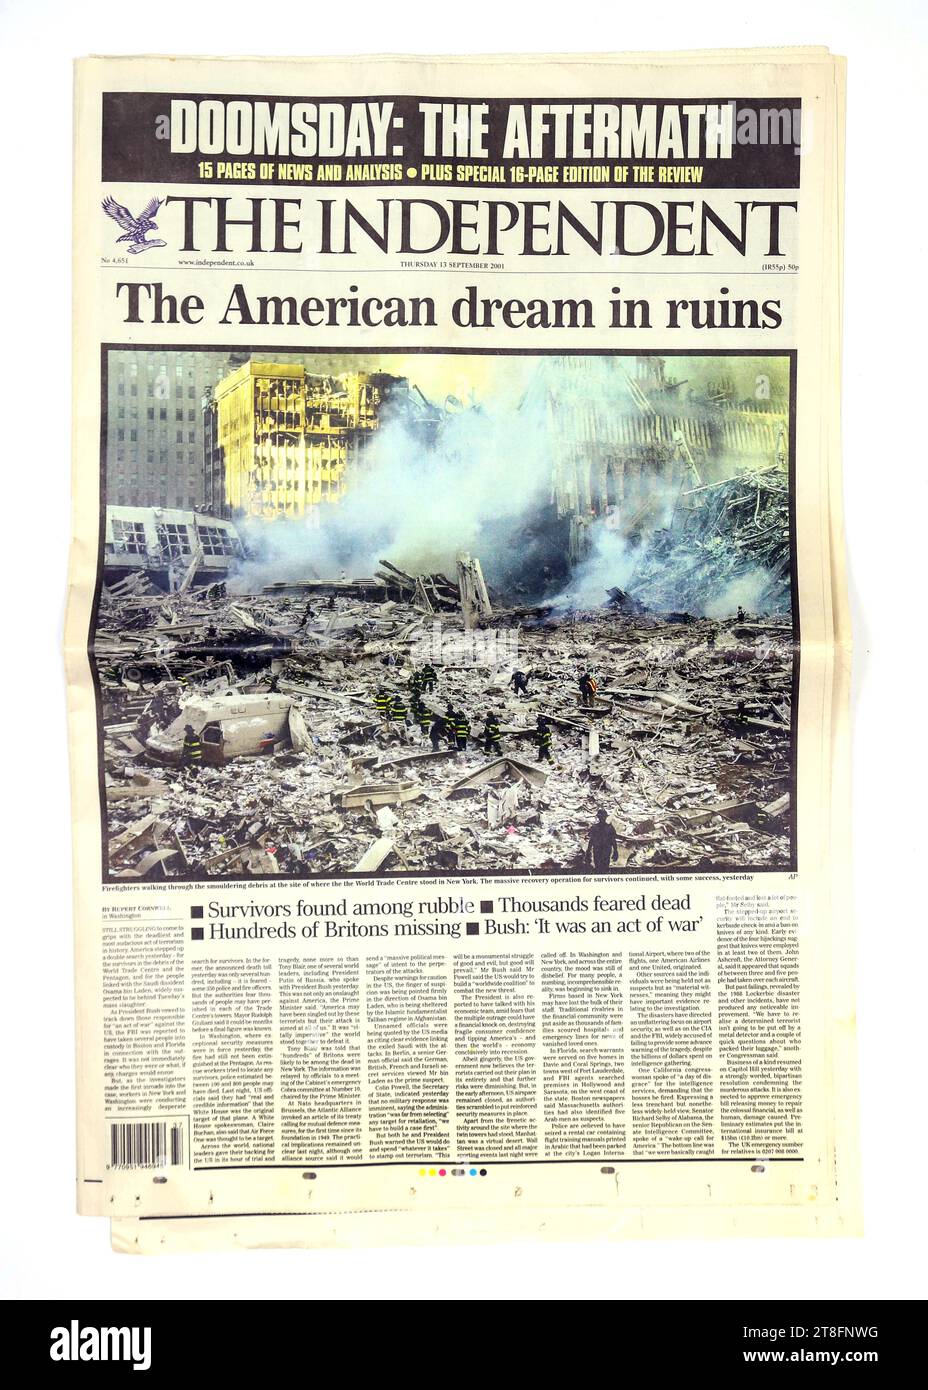 The Independent Newspaper, 13 settembre 2001 Foto Stock